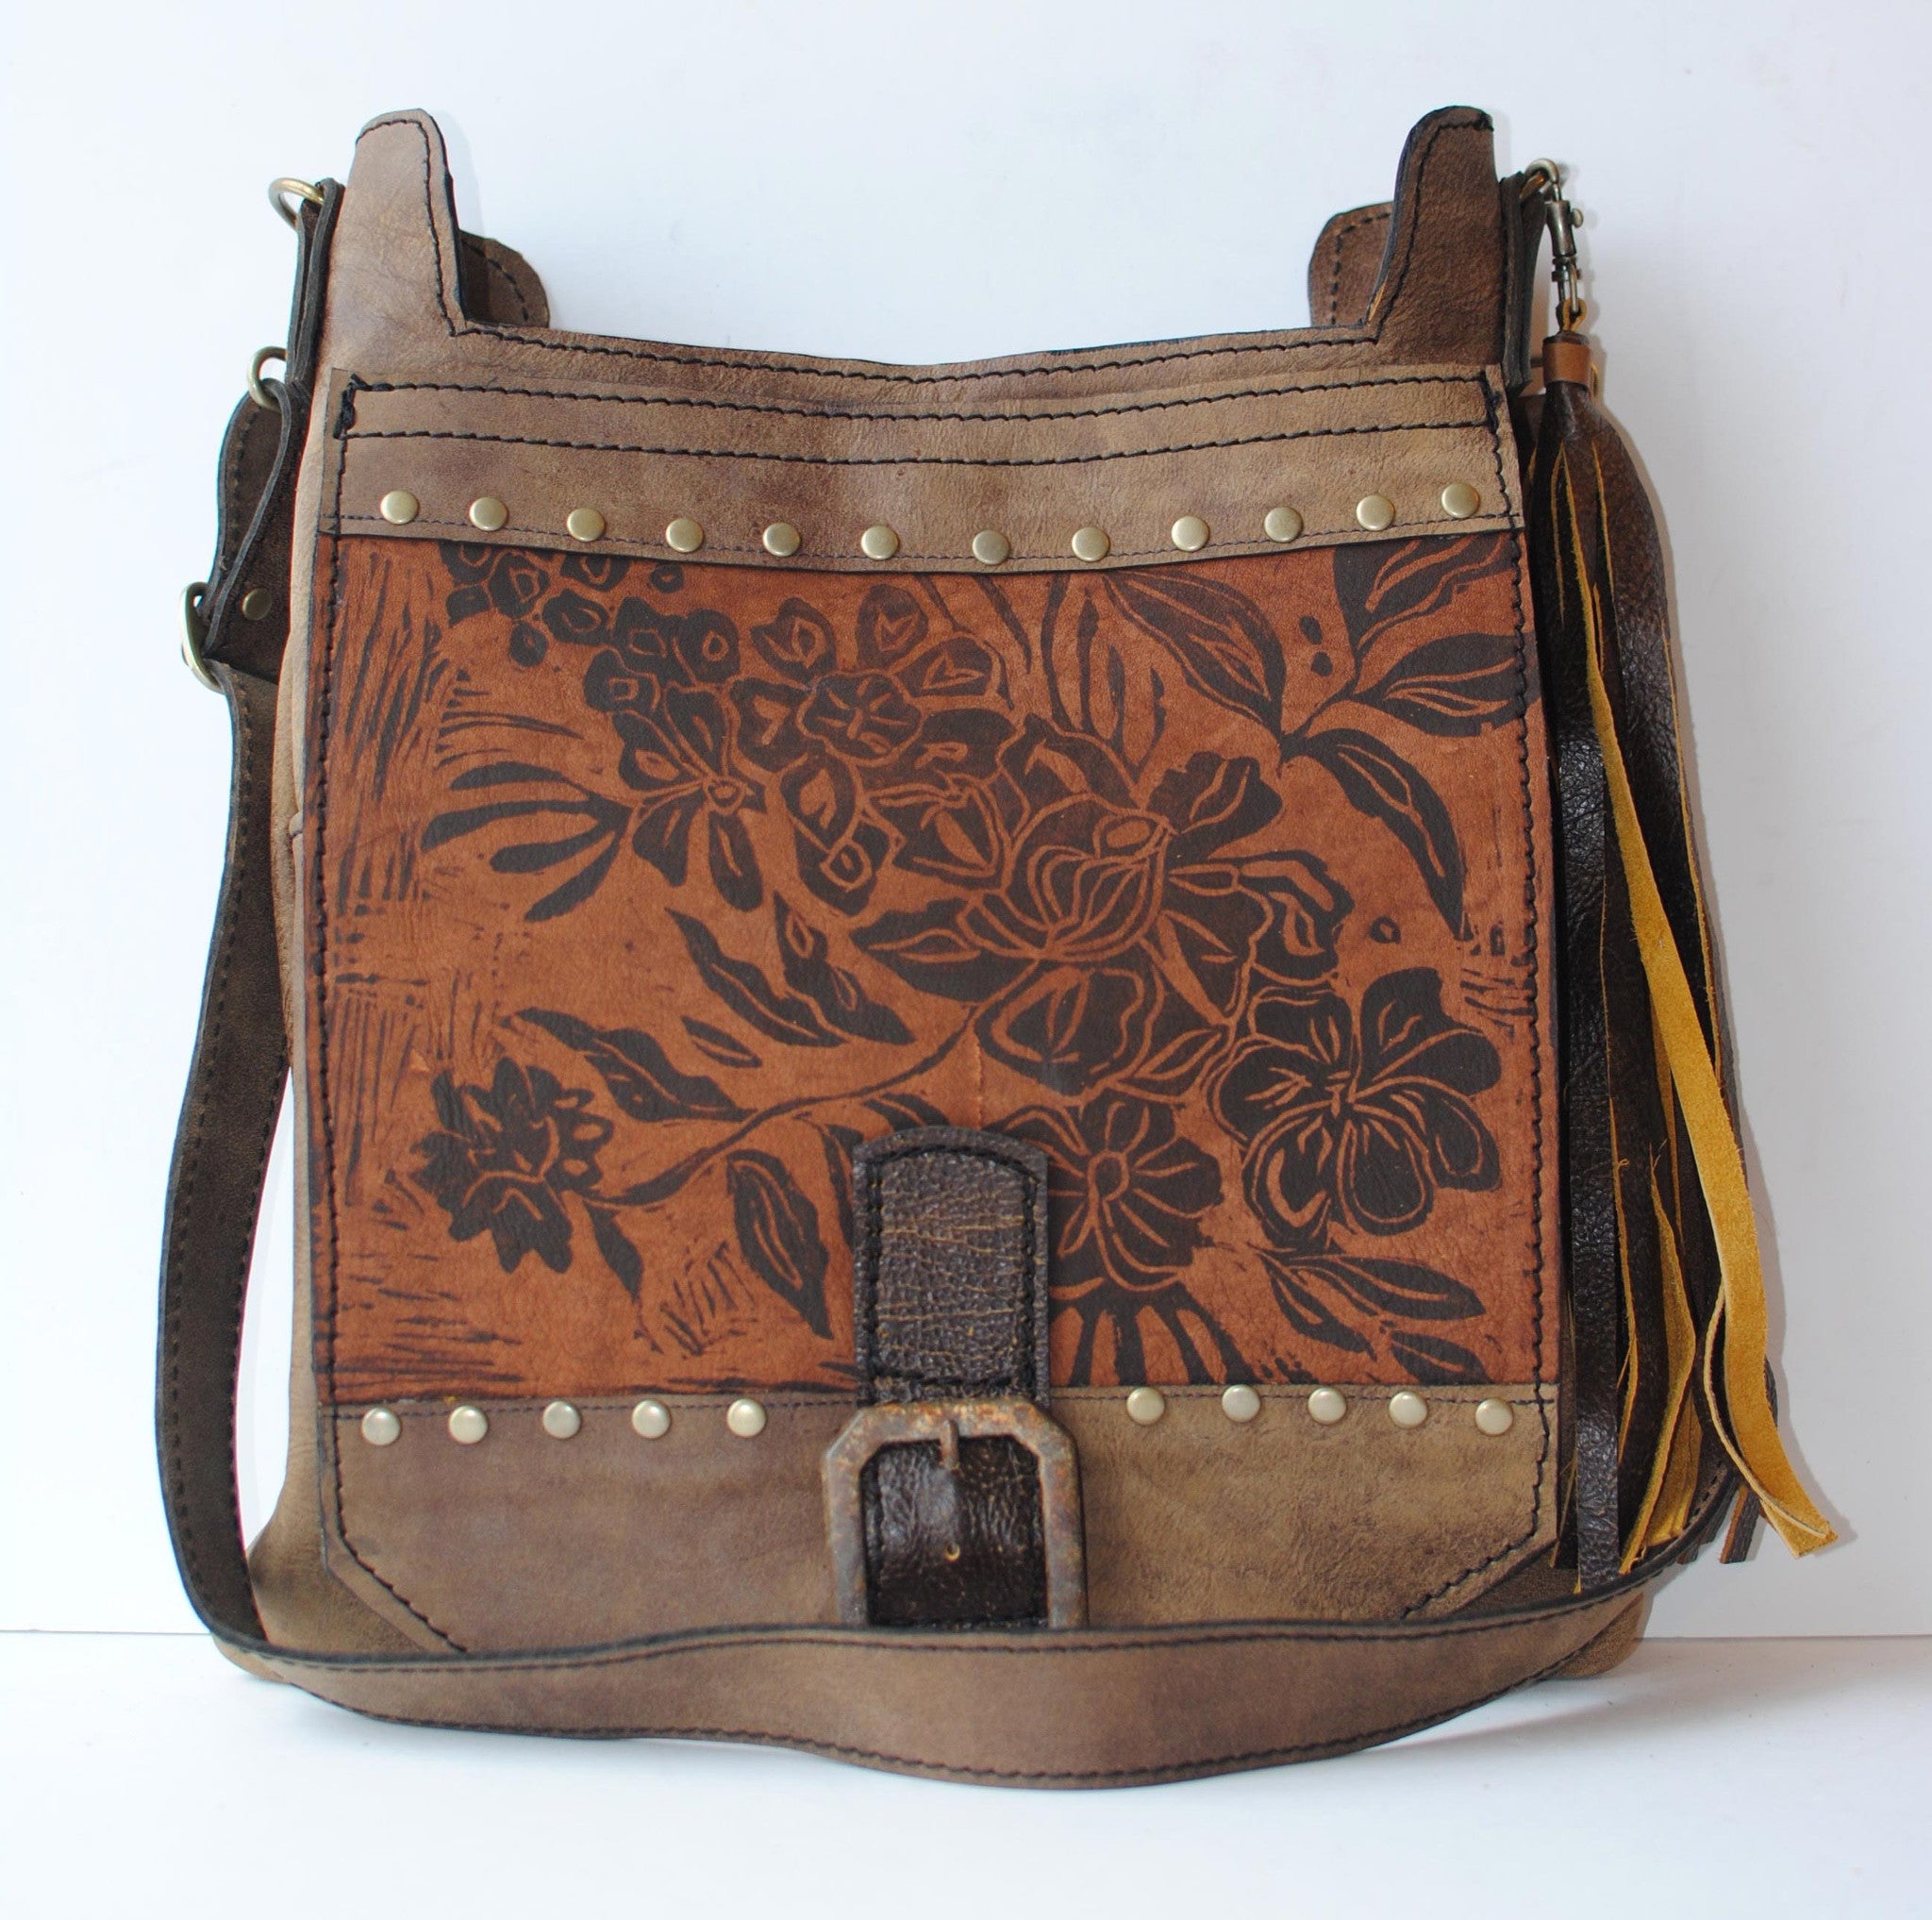 Urban Satchel Purse - Design Your Own Fabric/Faux Leather